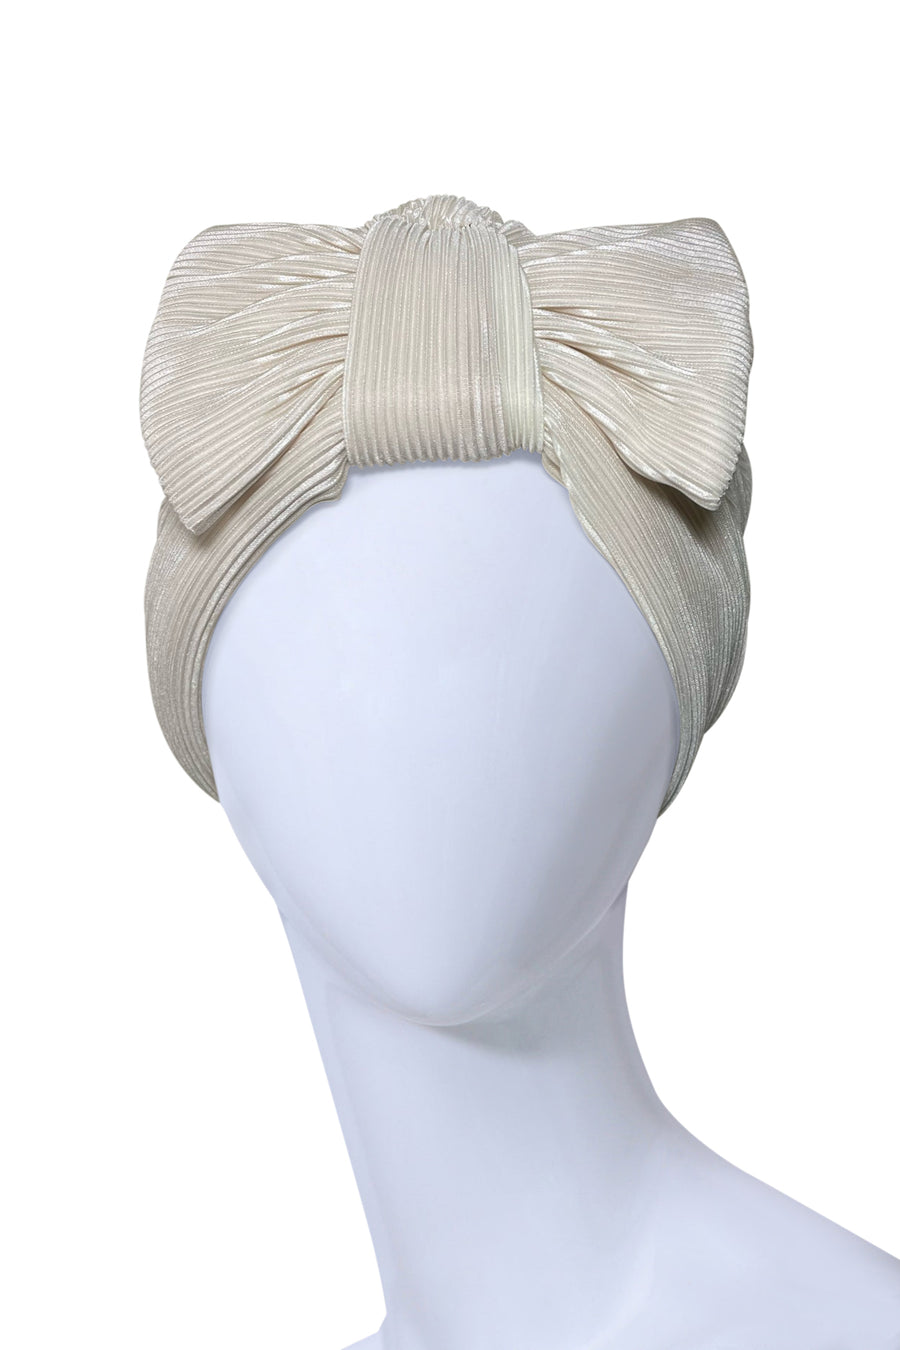 MONTORGEUIL - NEW OFF WHITE TURBAN WITH BOW !